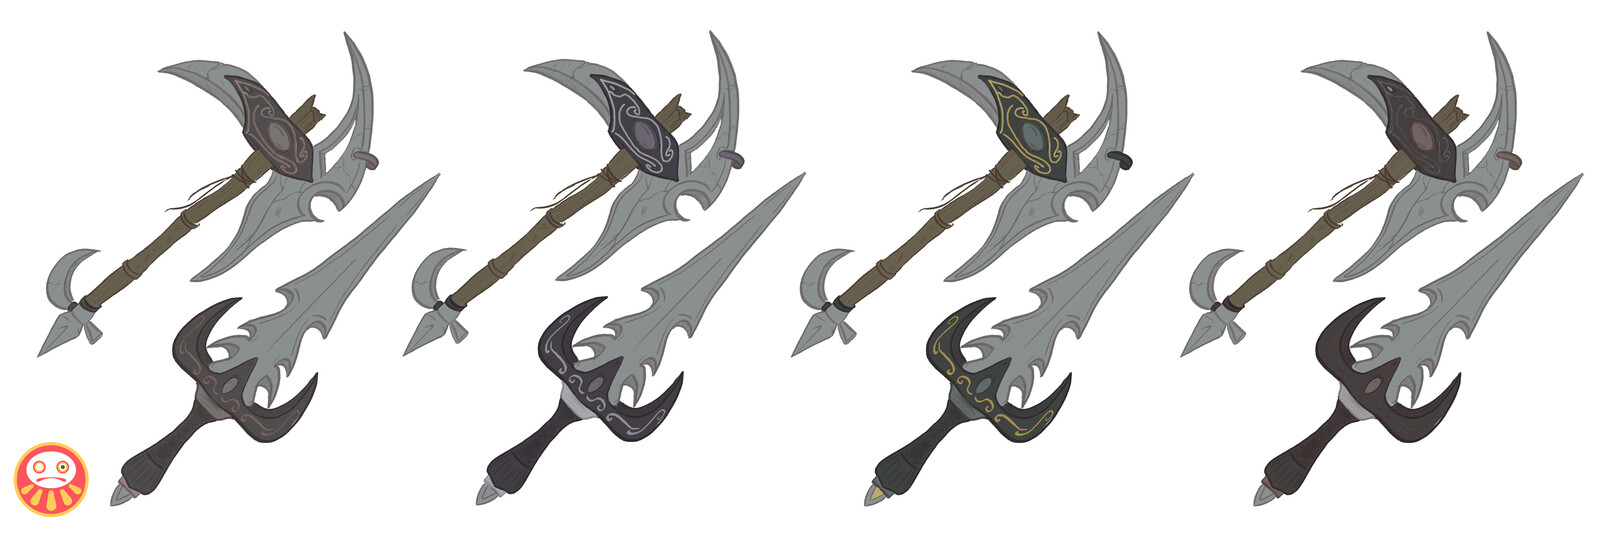 Weapon Variations